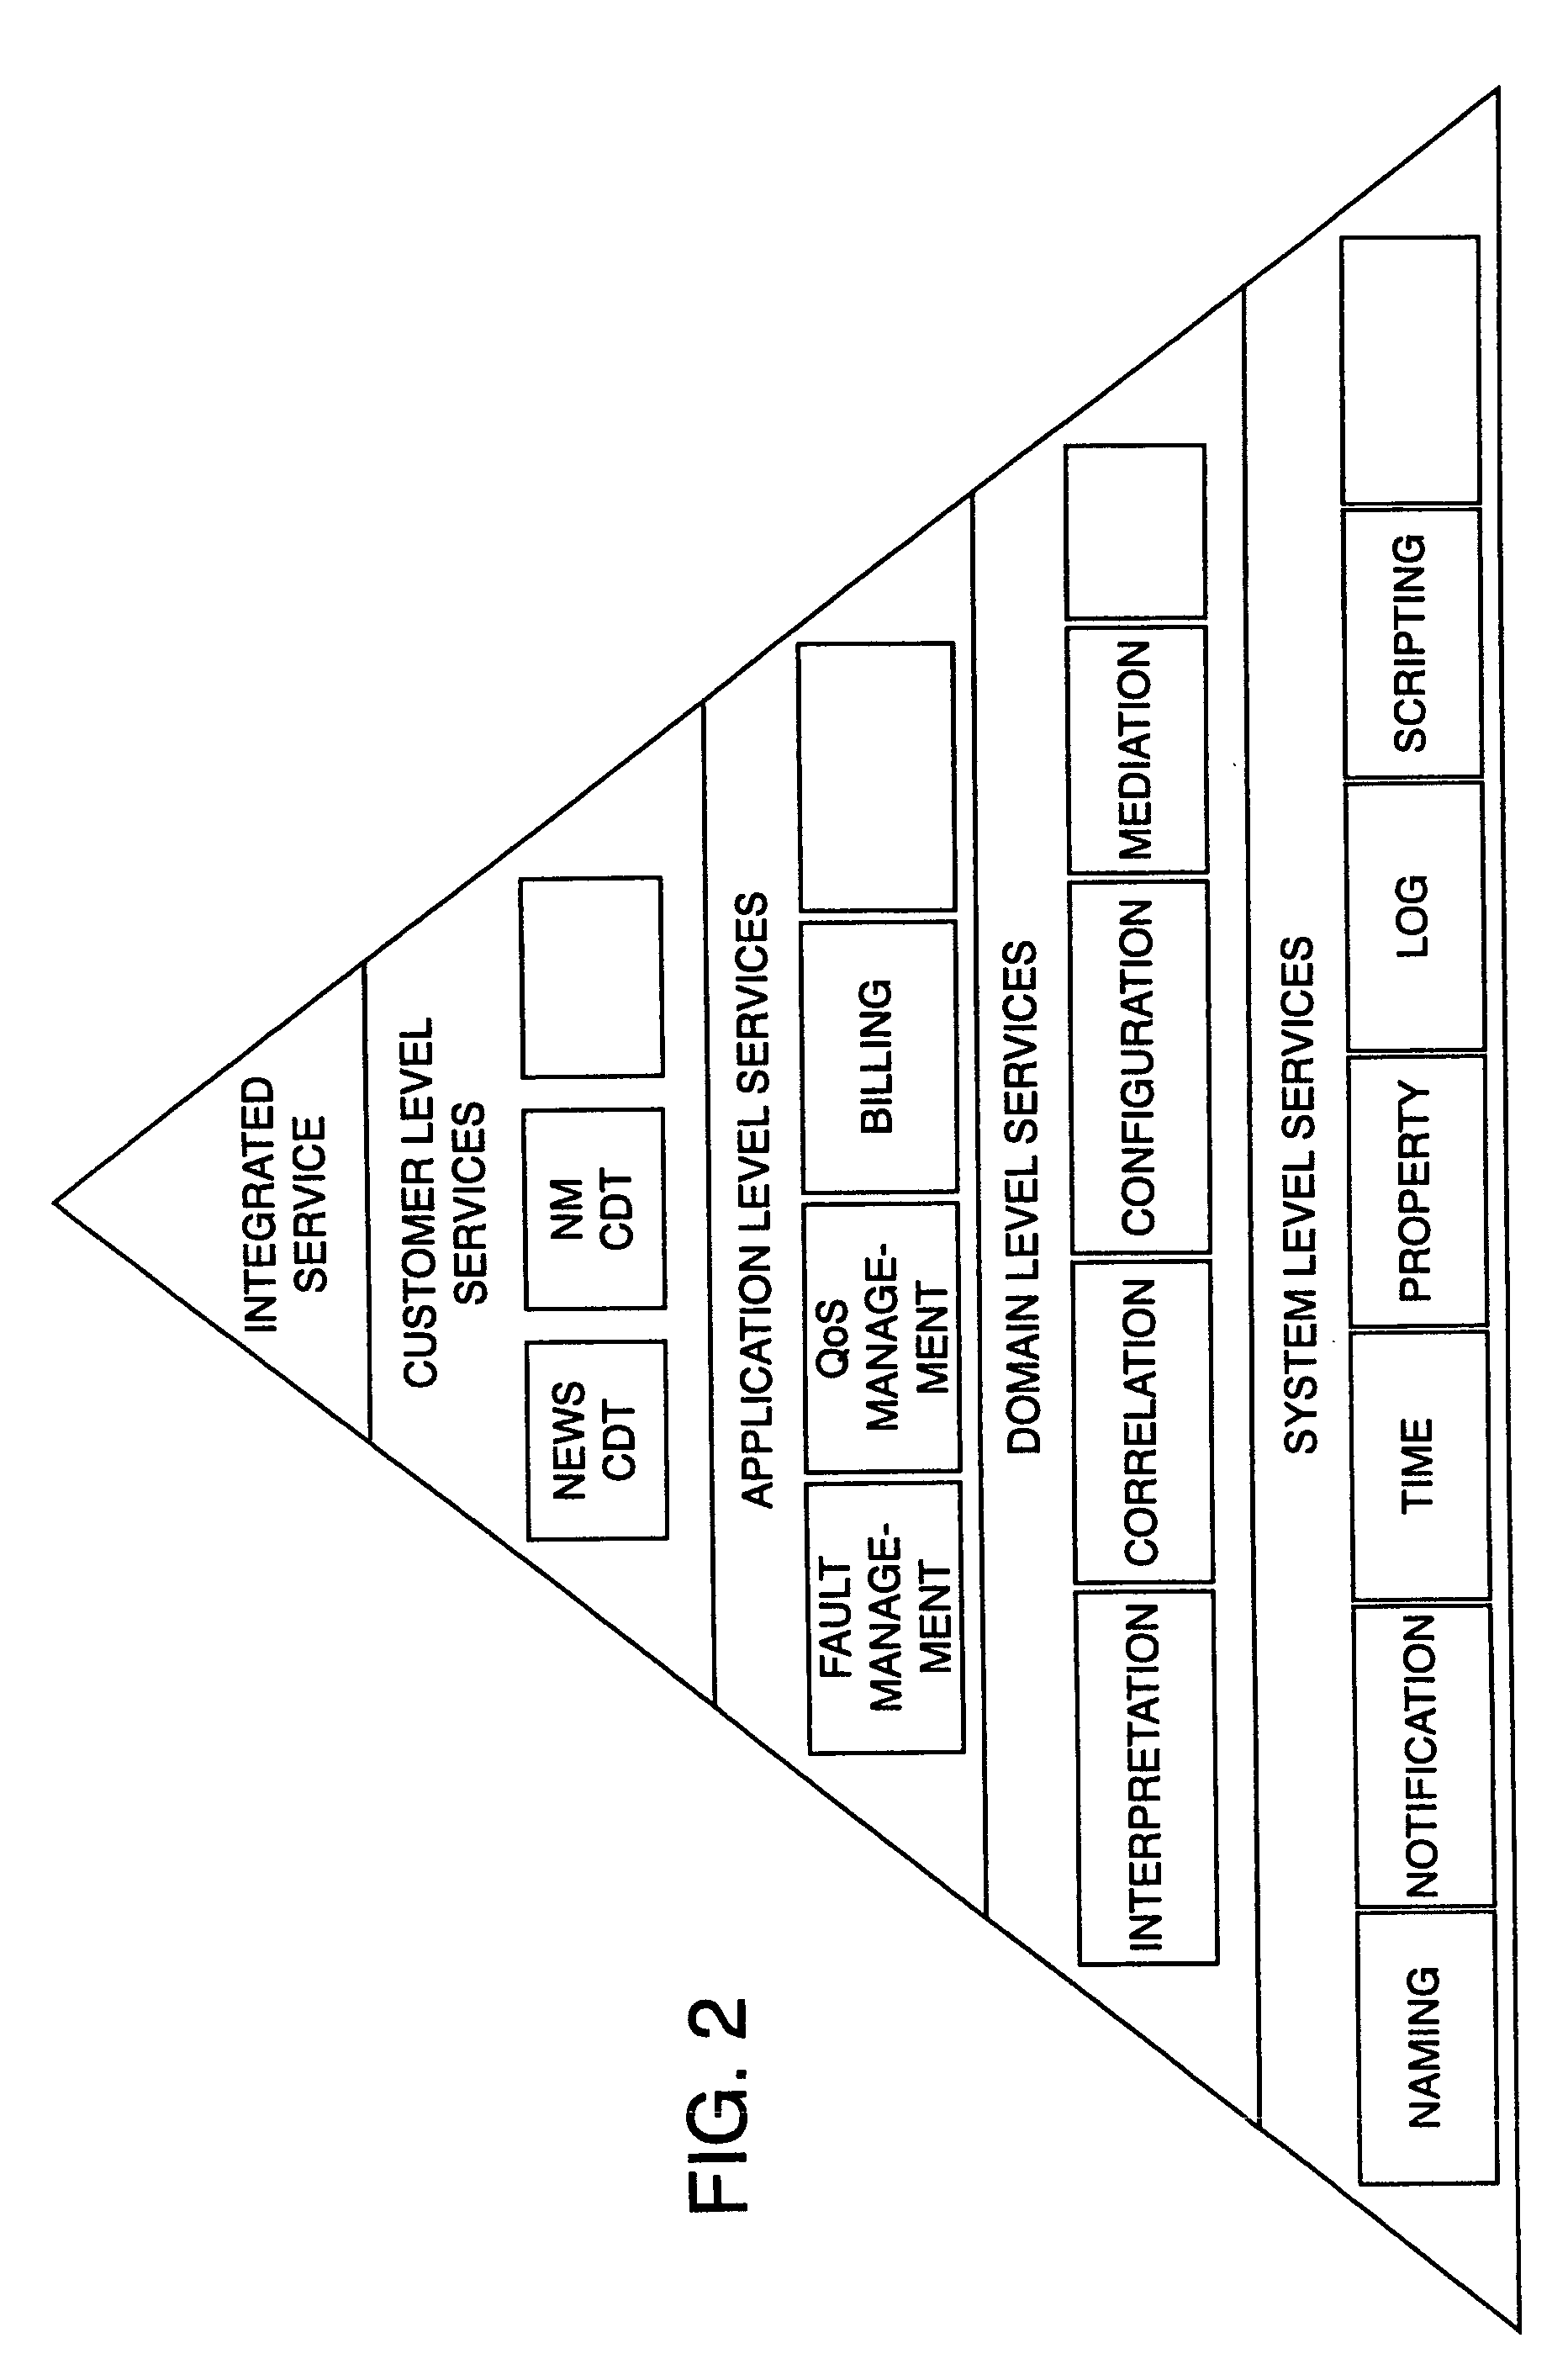 System and method for providing a global real-time advanced correlation environment architecture